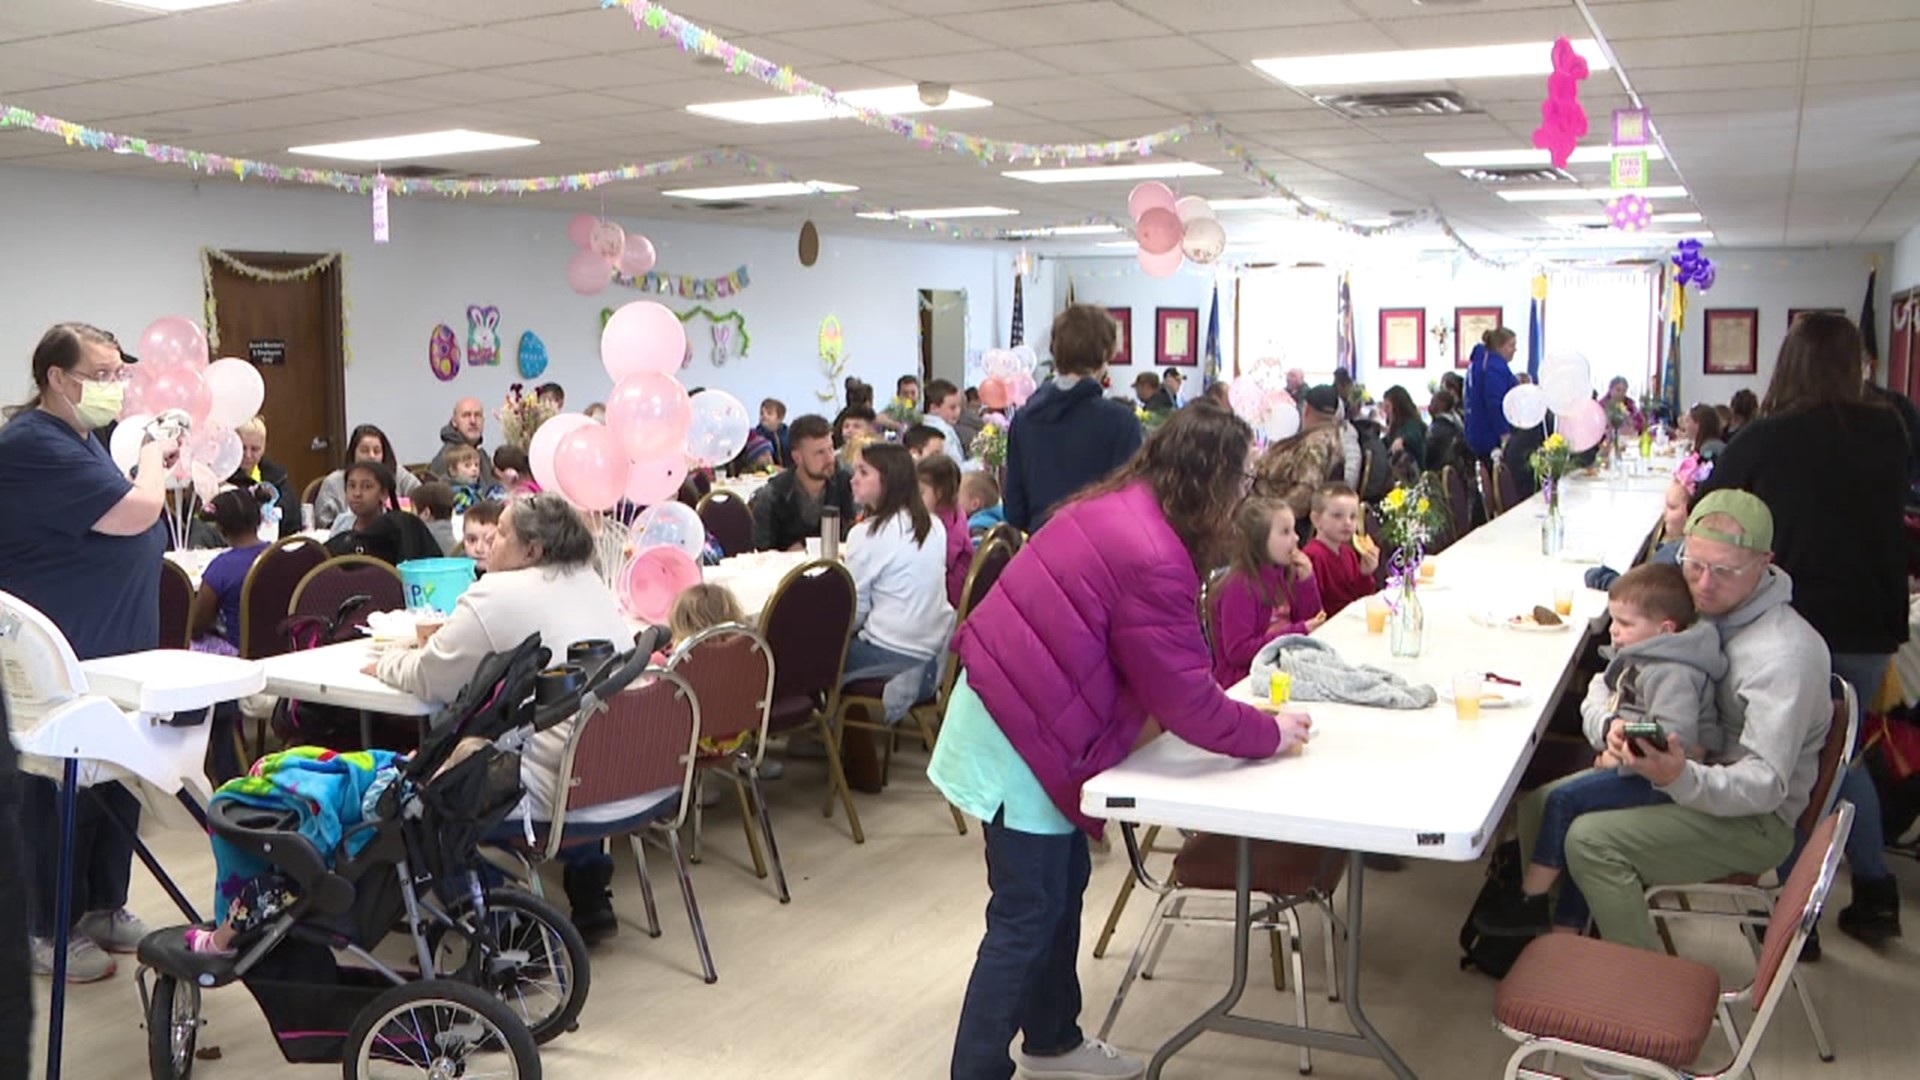 Kids in part of Monroe County got to have breakfast with the Easter bunny and enjoy an egg hunt Sunday.